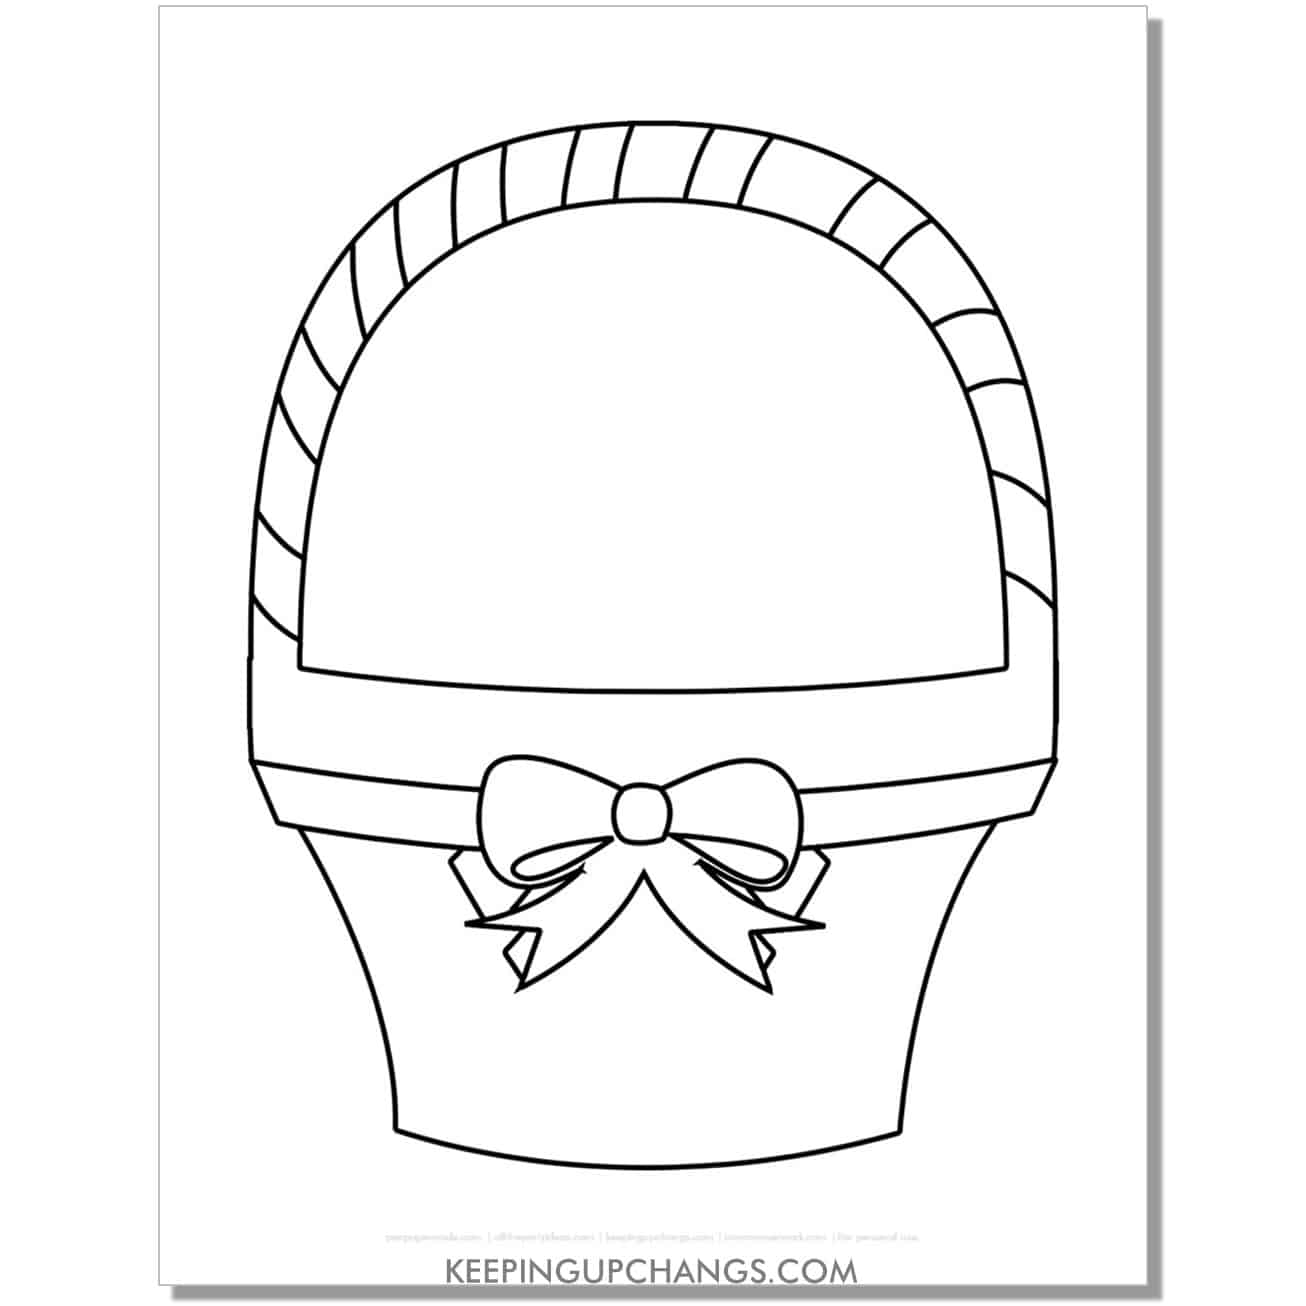 empty Easter basket with weave on handle coloring page, sheet.